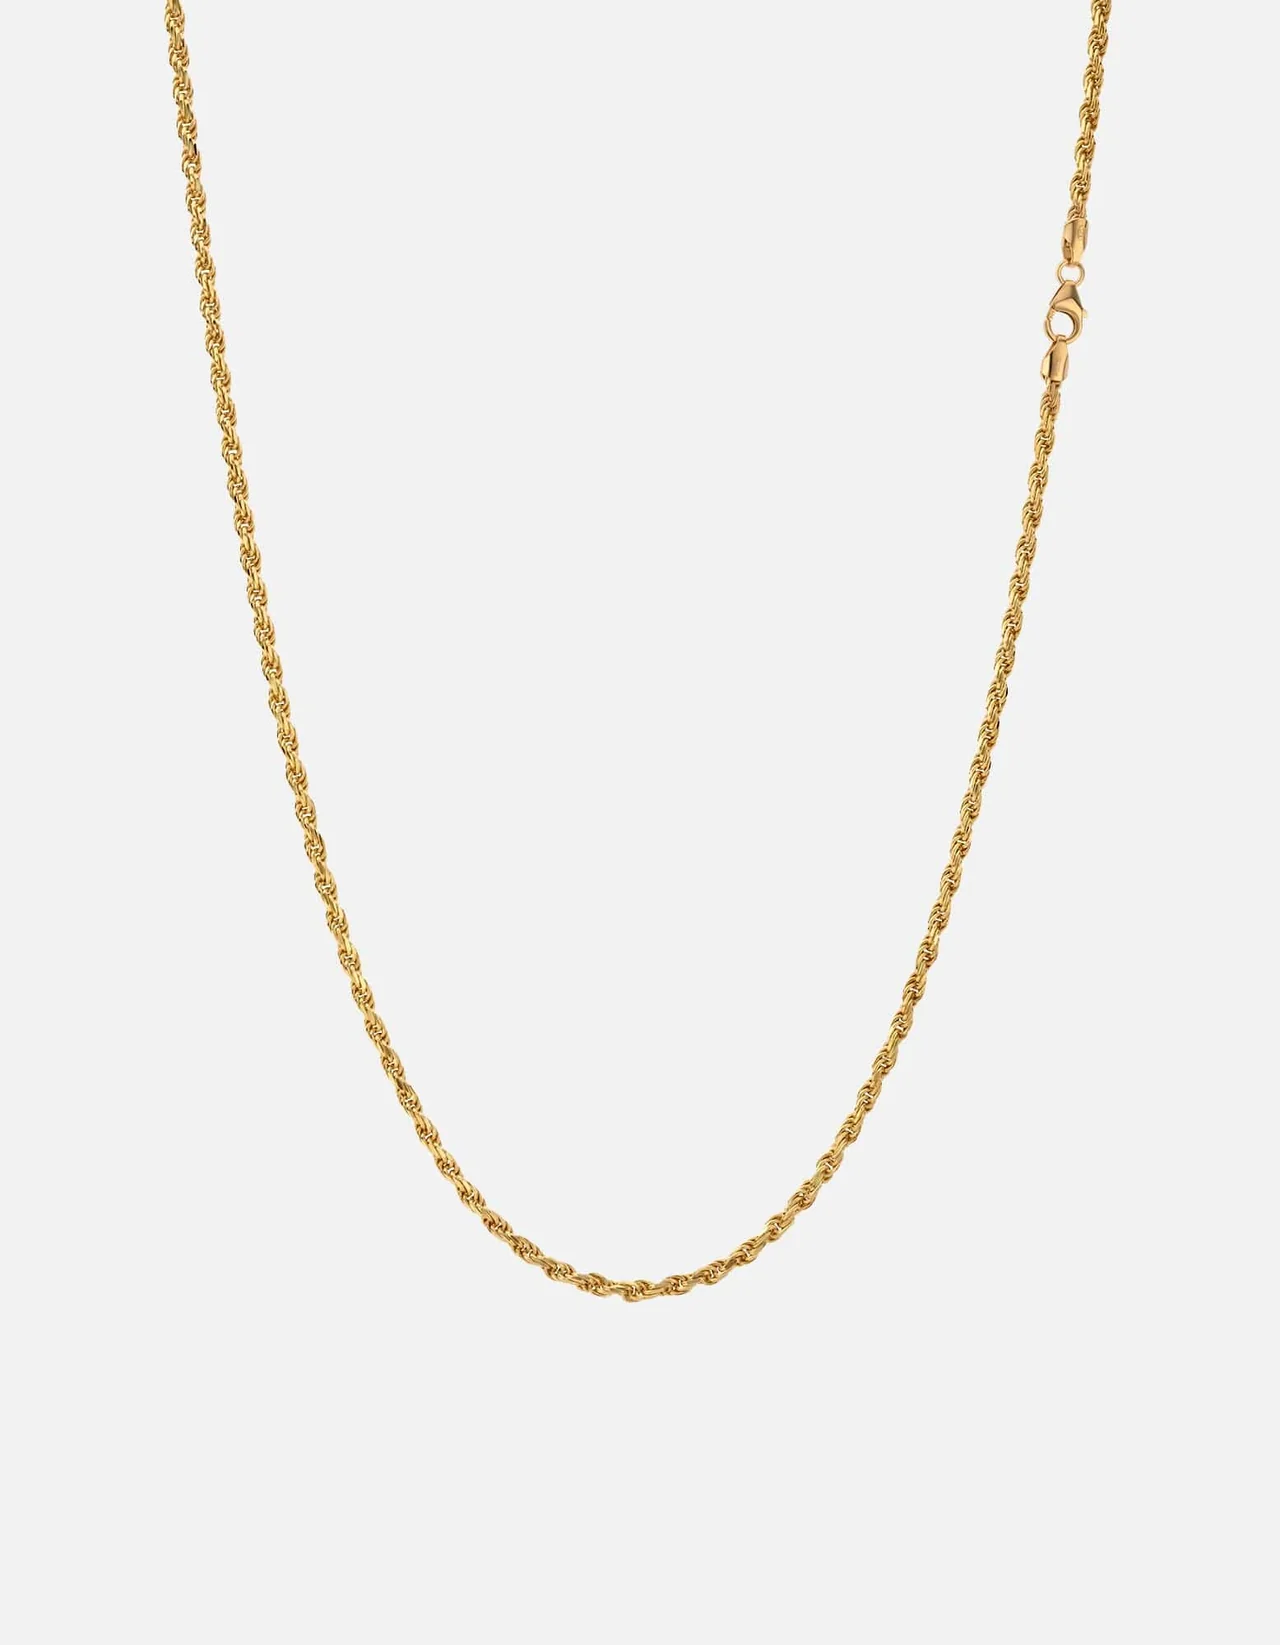 gold-chains-under-200-style-rave